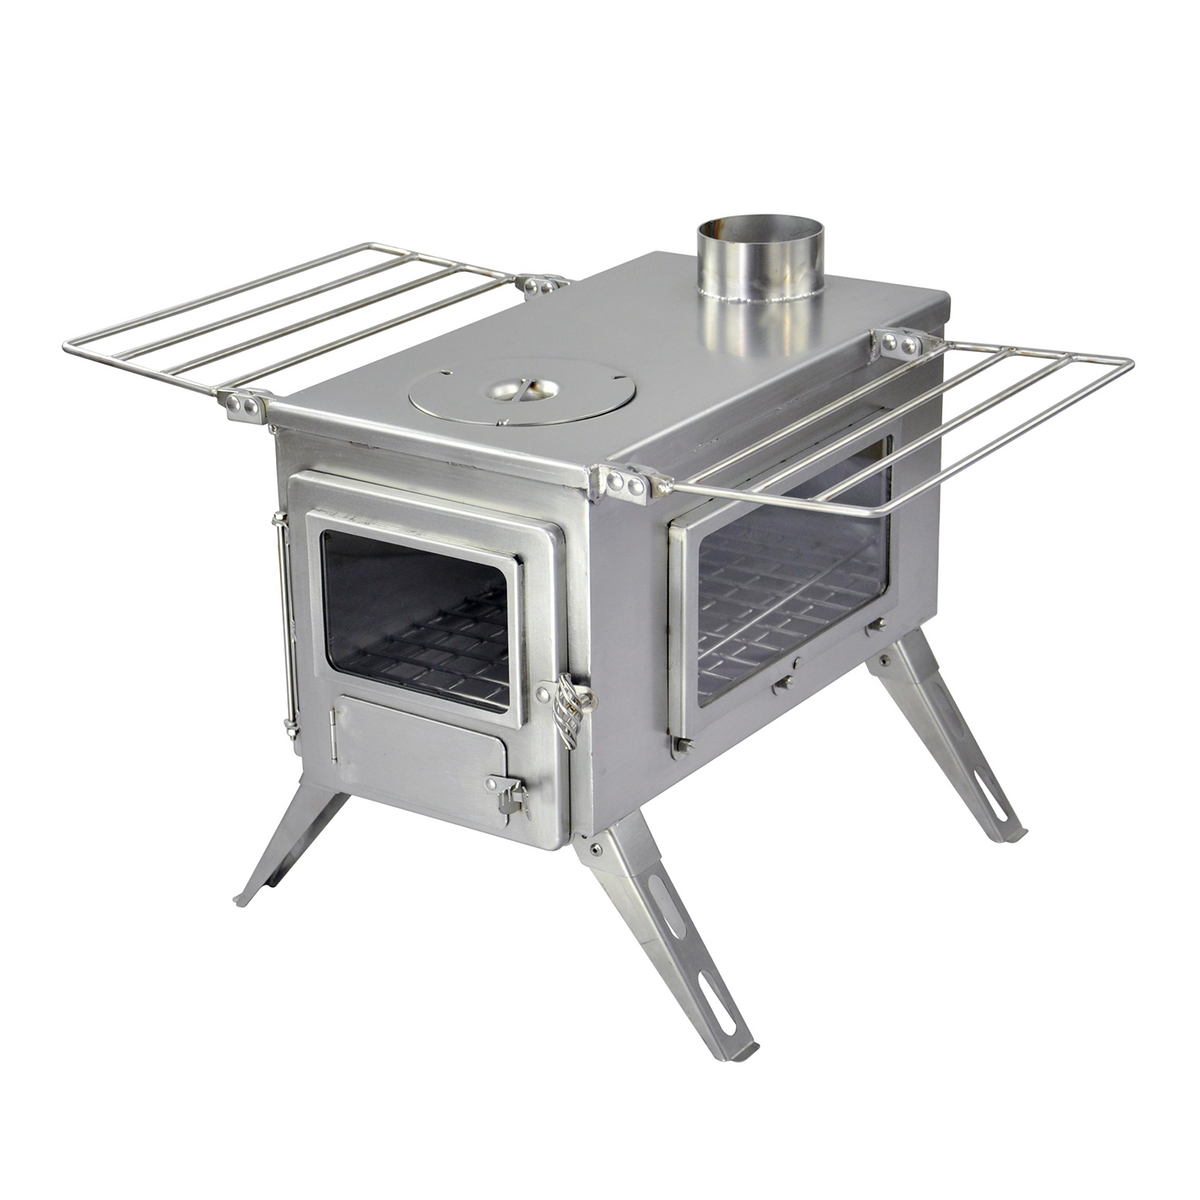 Winnerwell Nomad View - Large | Portable Wood Burning Stove